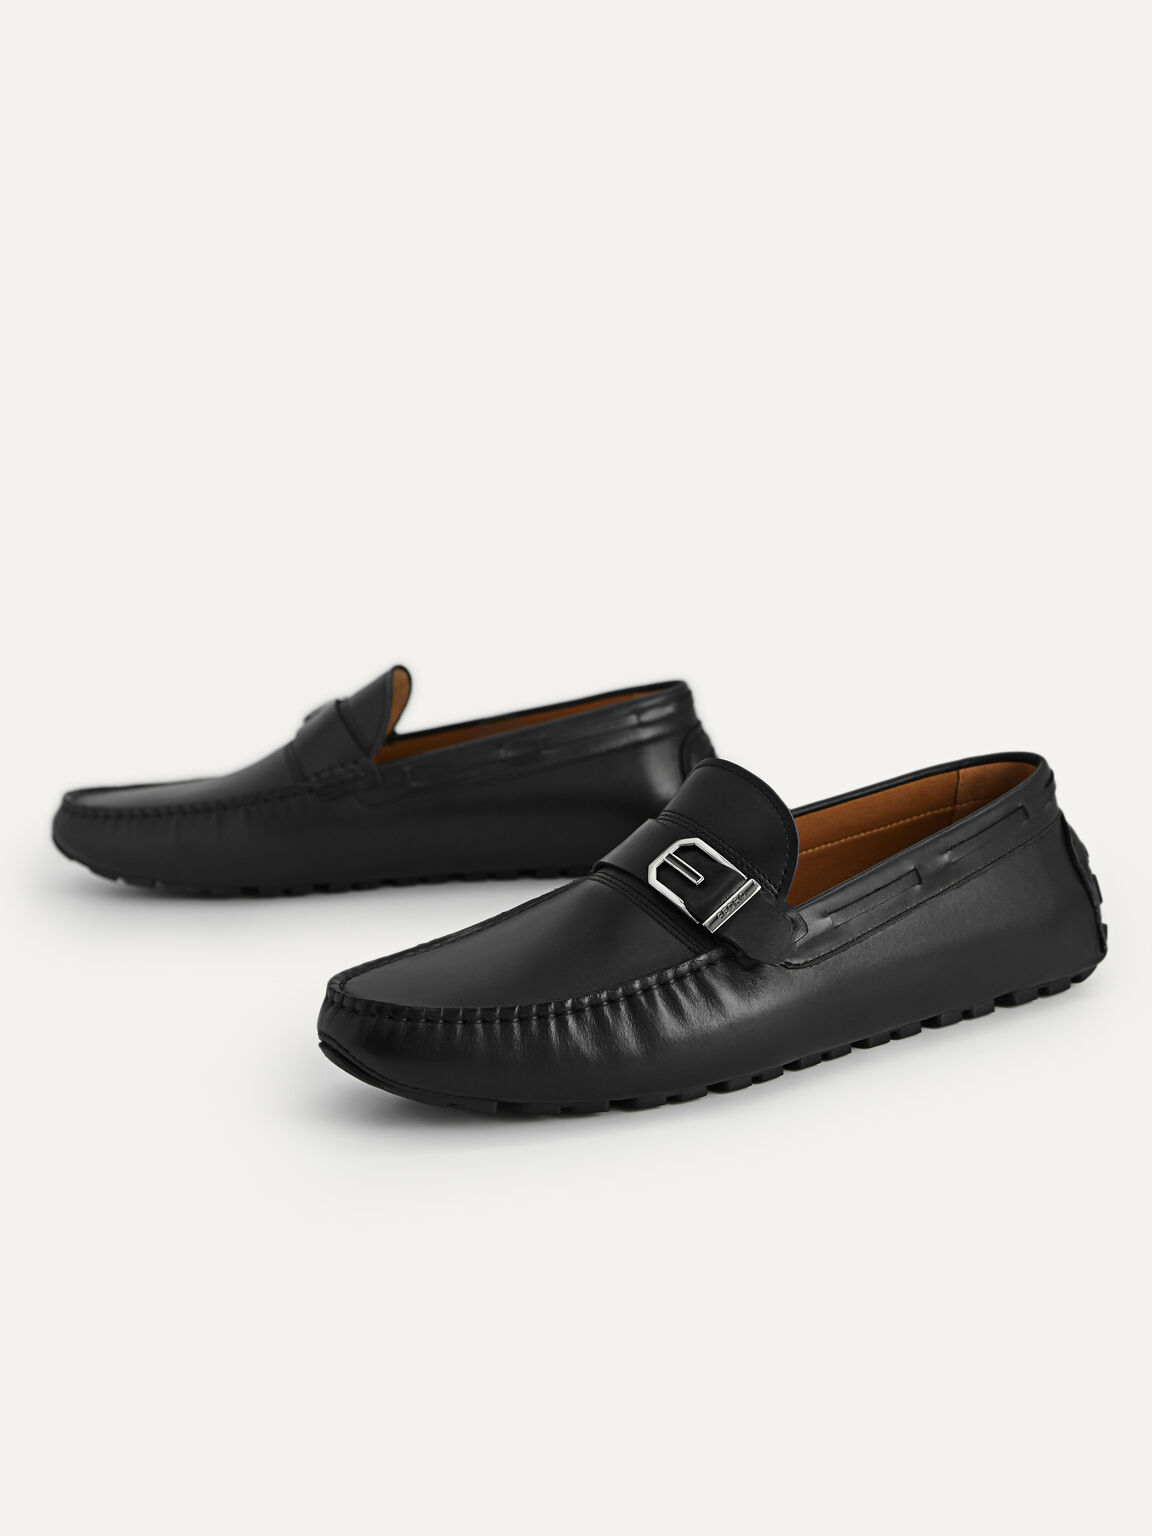 Leather Moccasins with Buckle Detailing, Black